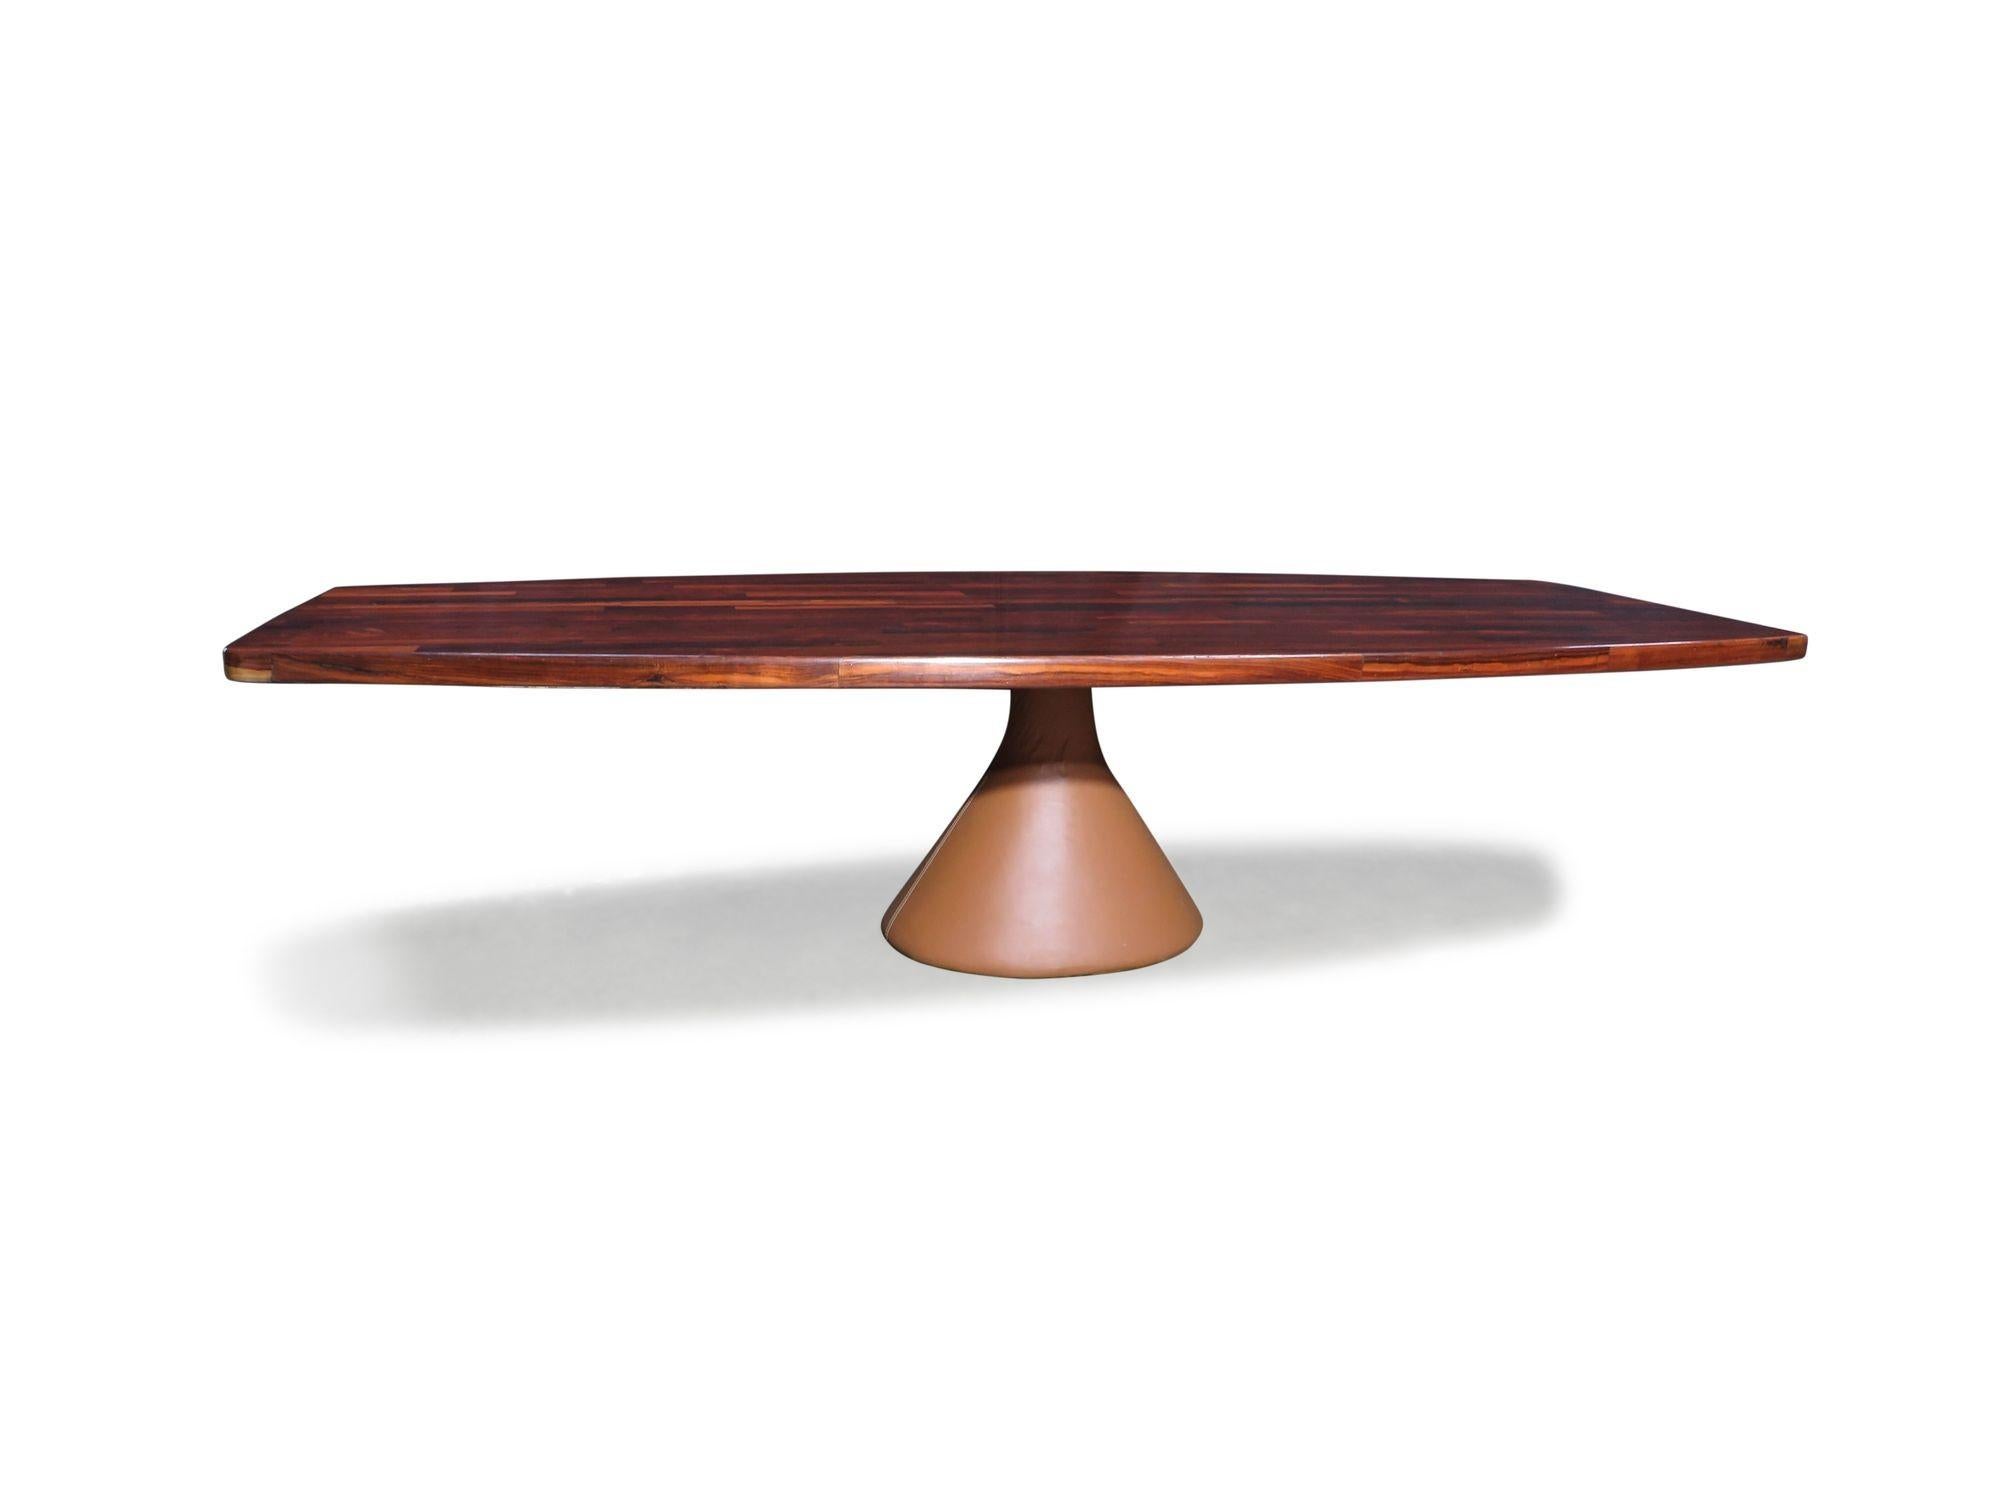 Steel Jorge Zalszupin L'atelier Guanabara Rosewood Dining or Conference Pedestal Table For Sale